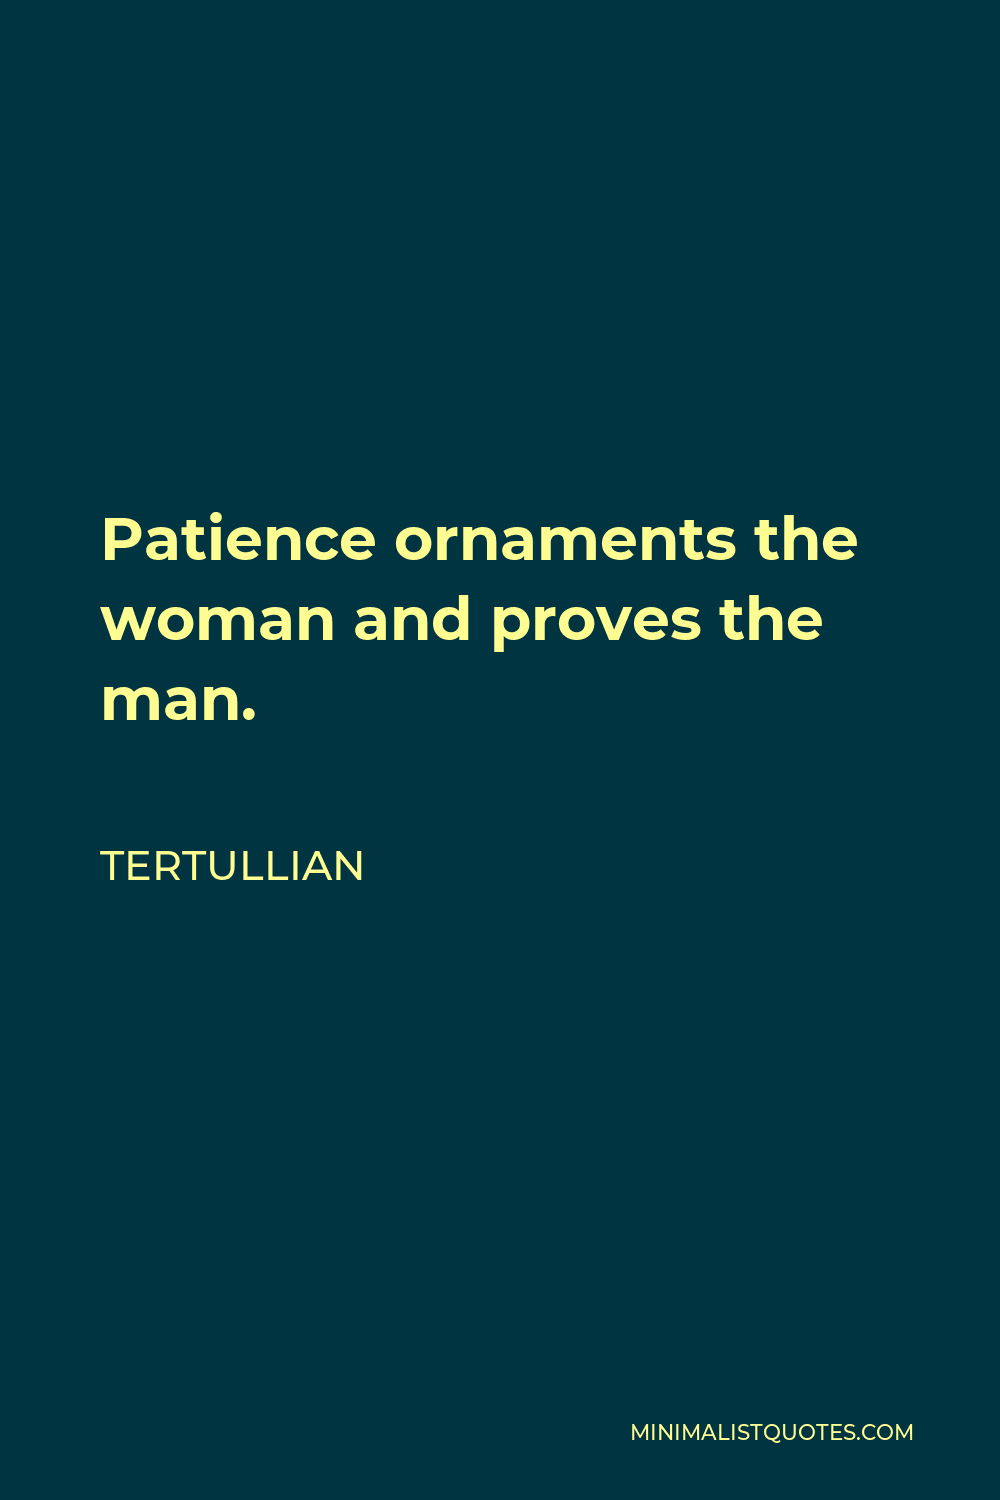 Tertullian Quote - Patience ornaments the woman and proves the man.